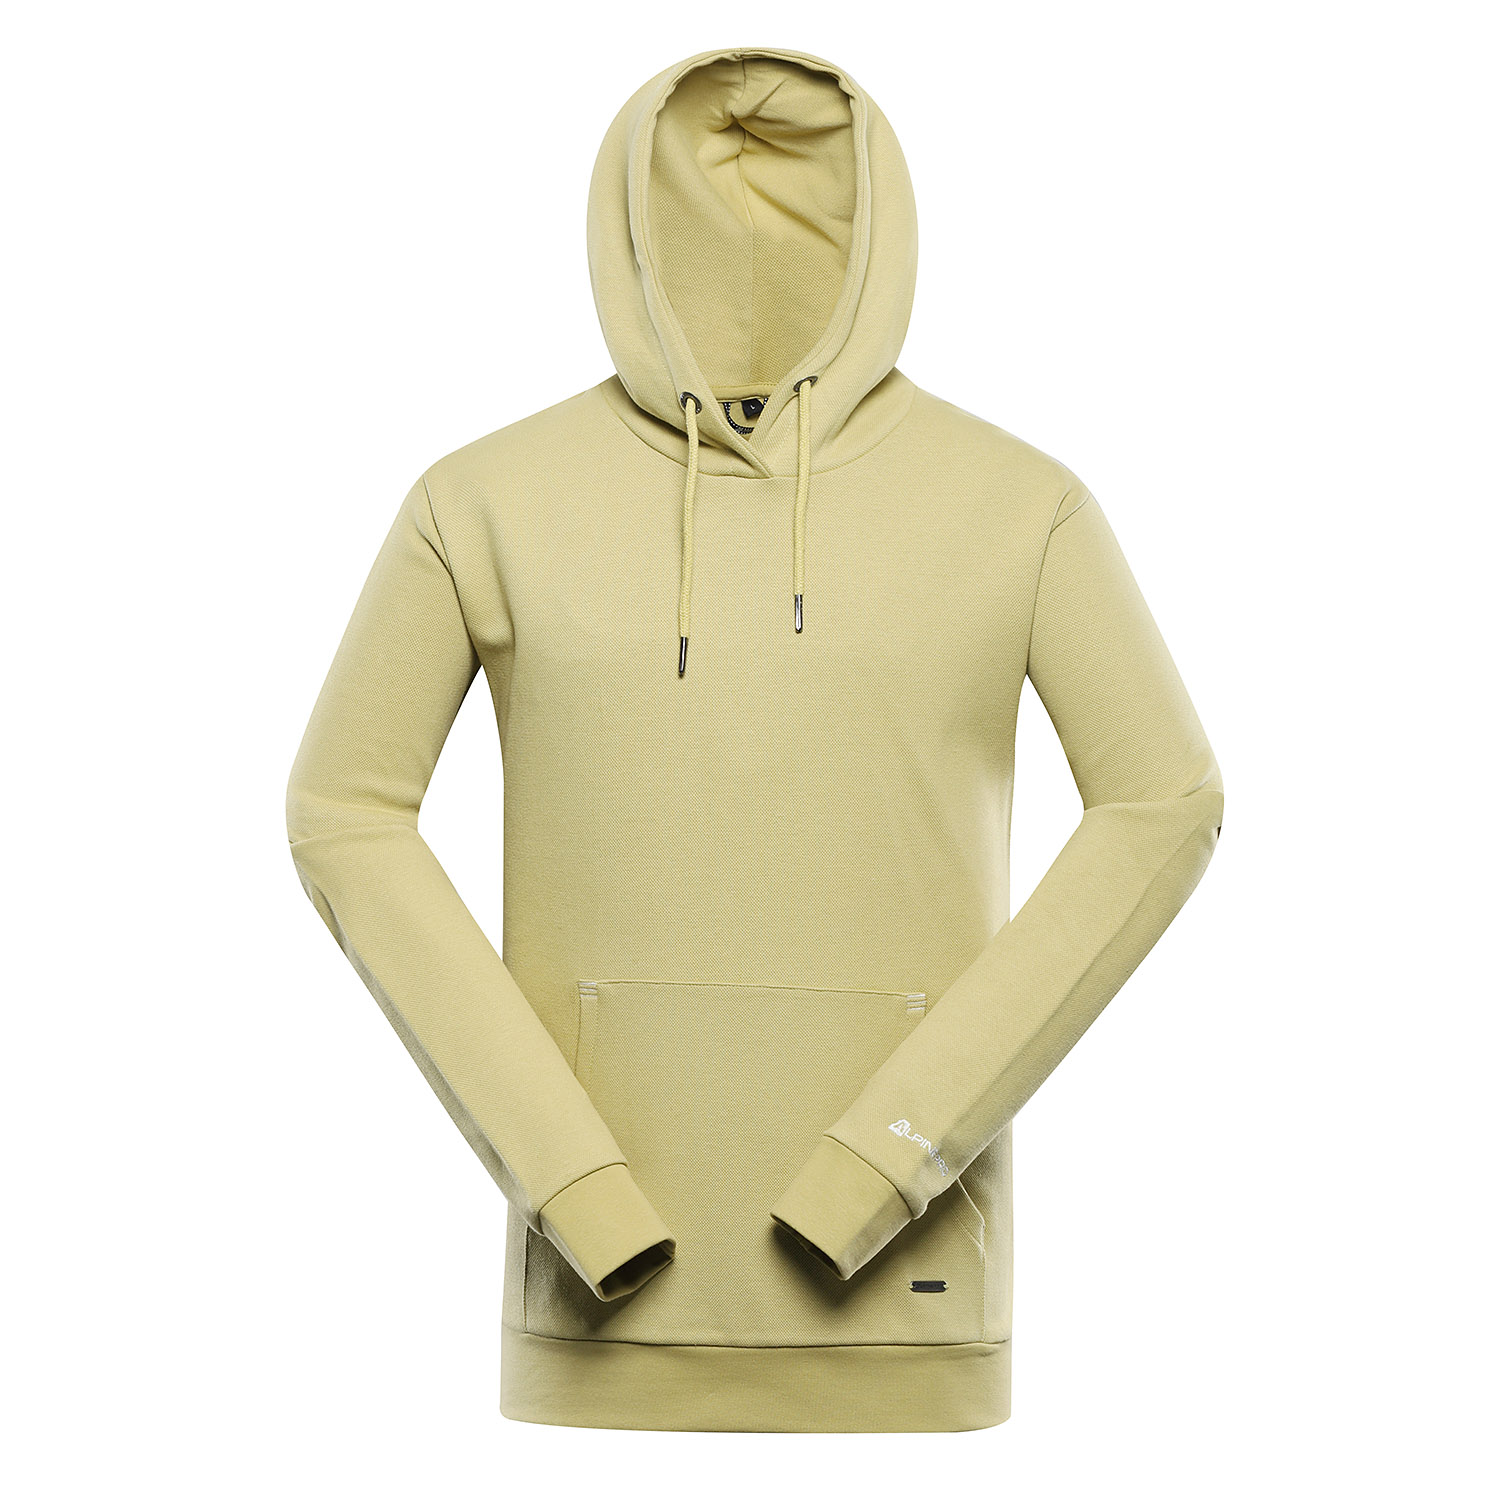 Men's hoodie ALPINE PRO MALM weeping willow